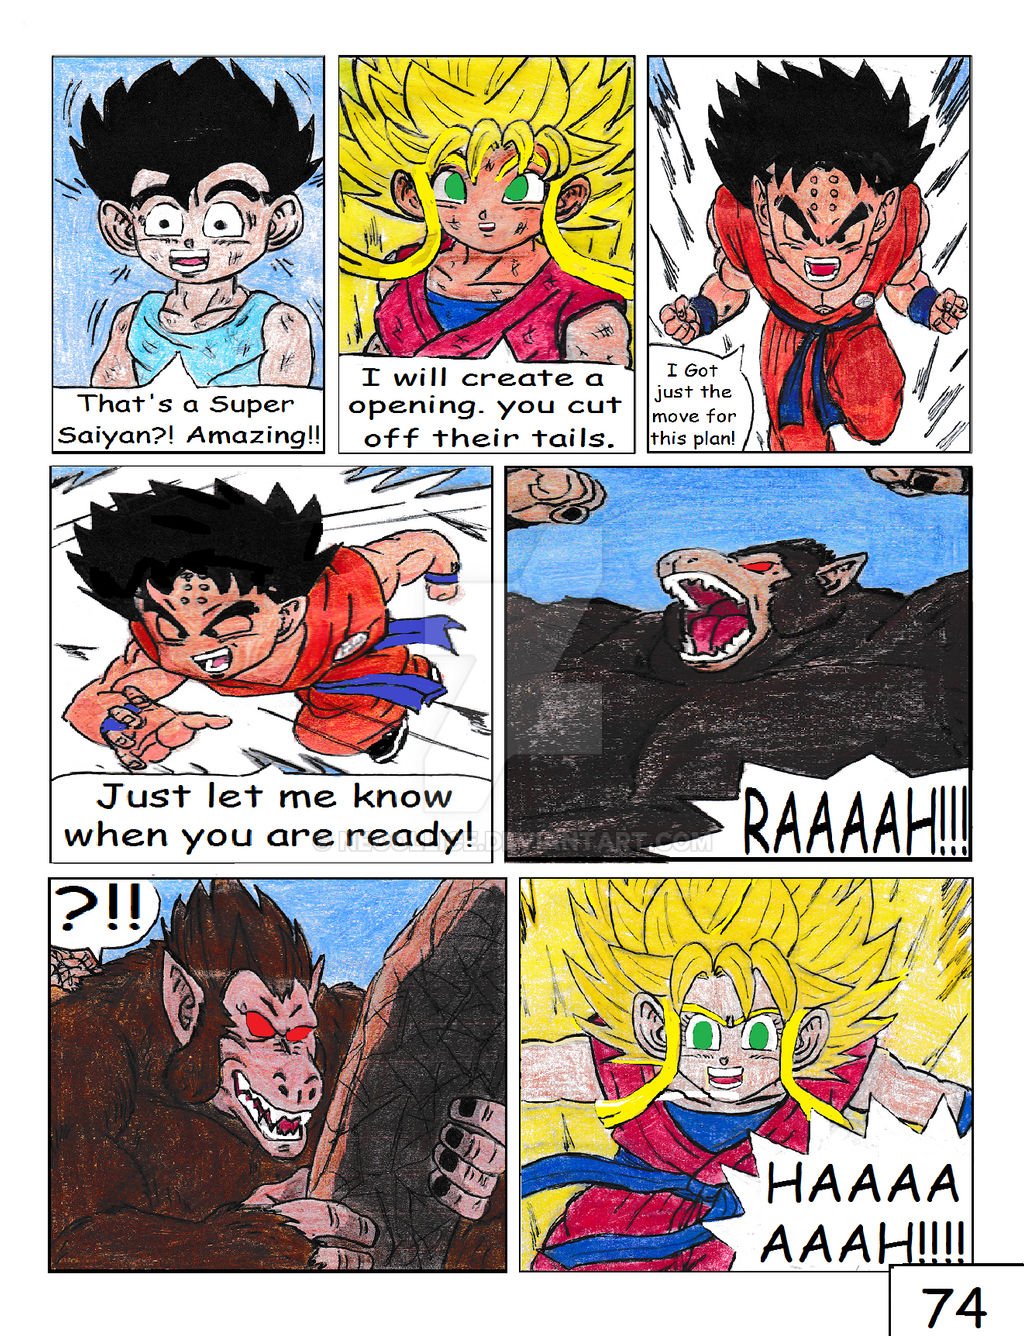 Dragon Ball SF Volume 2 Page 39 by NeoOllice on DeviantArt